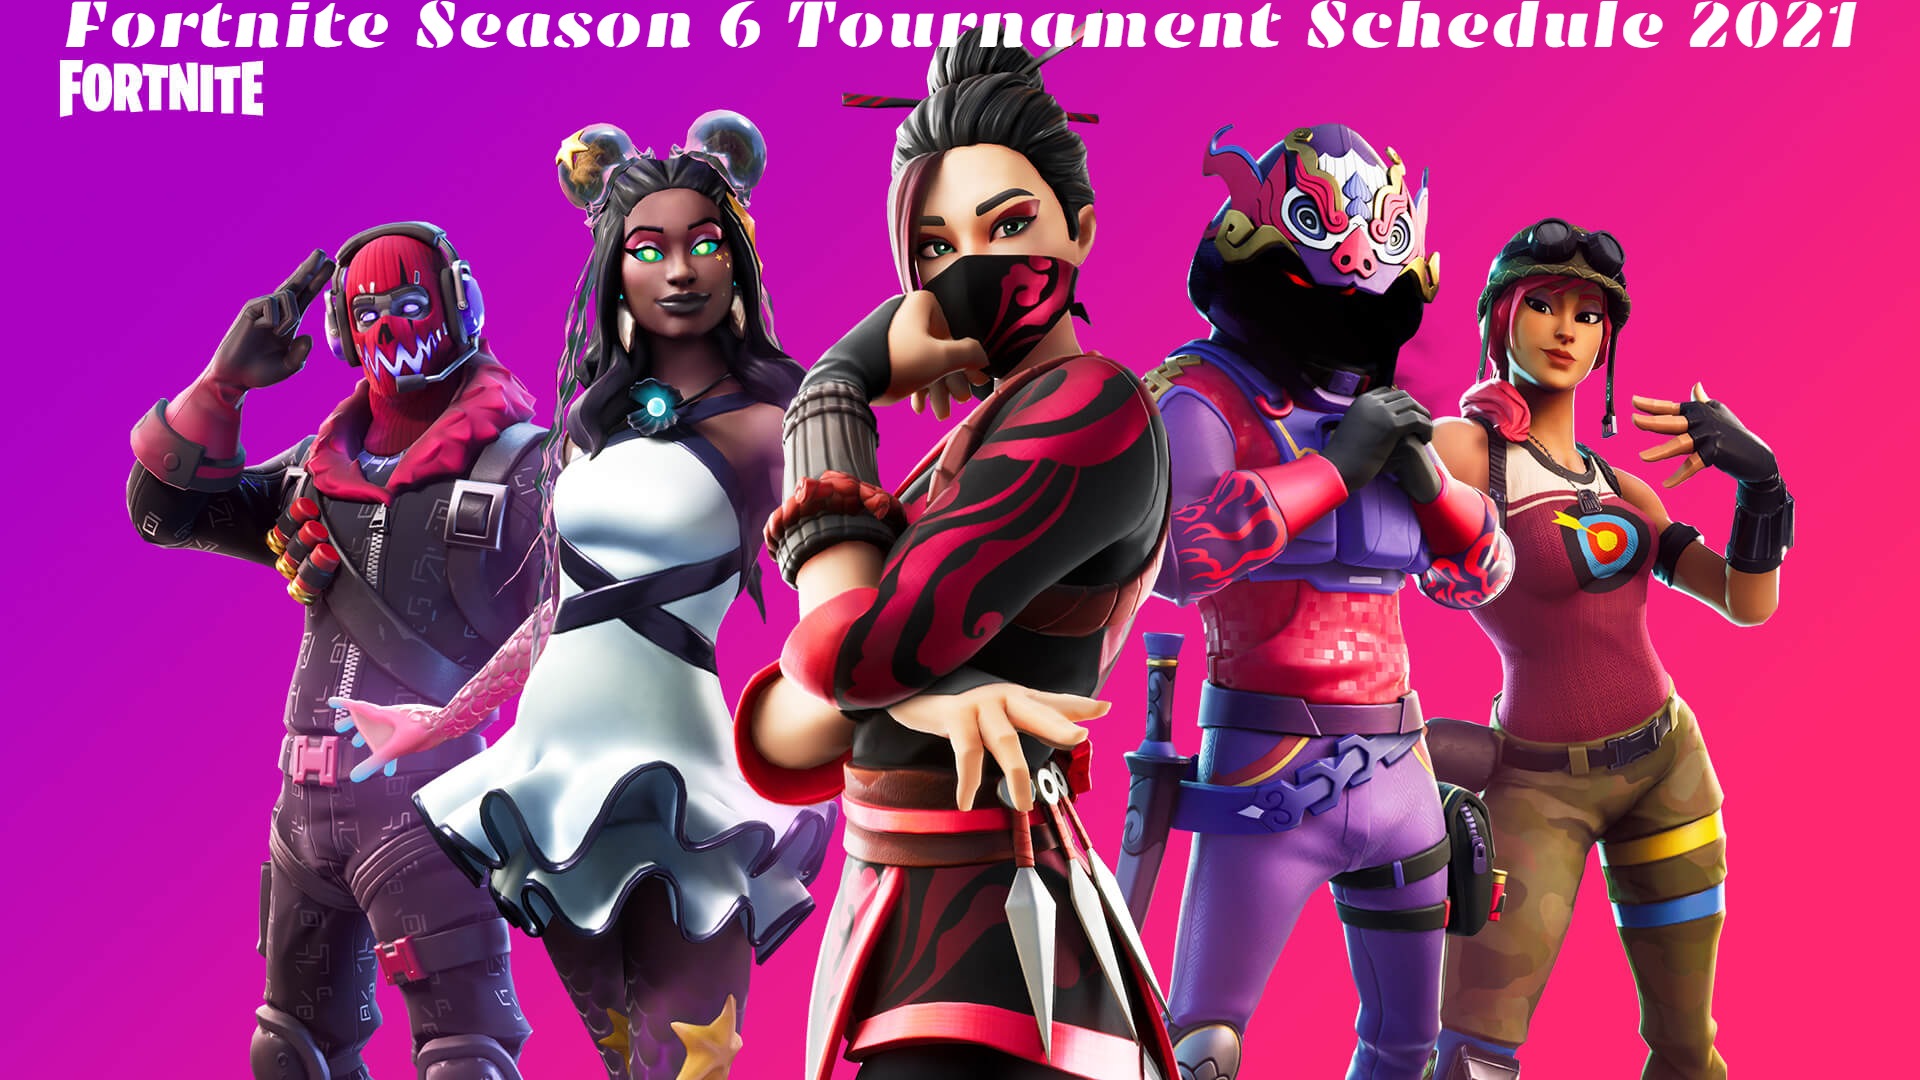 You are currently viewing Fortnite Season 6 Tournament Schedule 2021